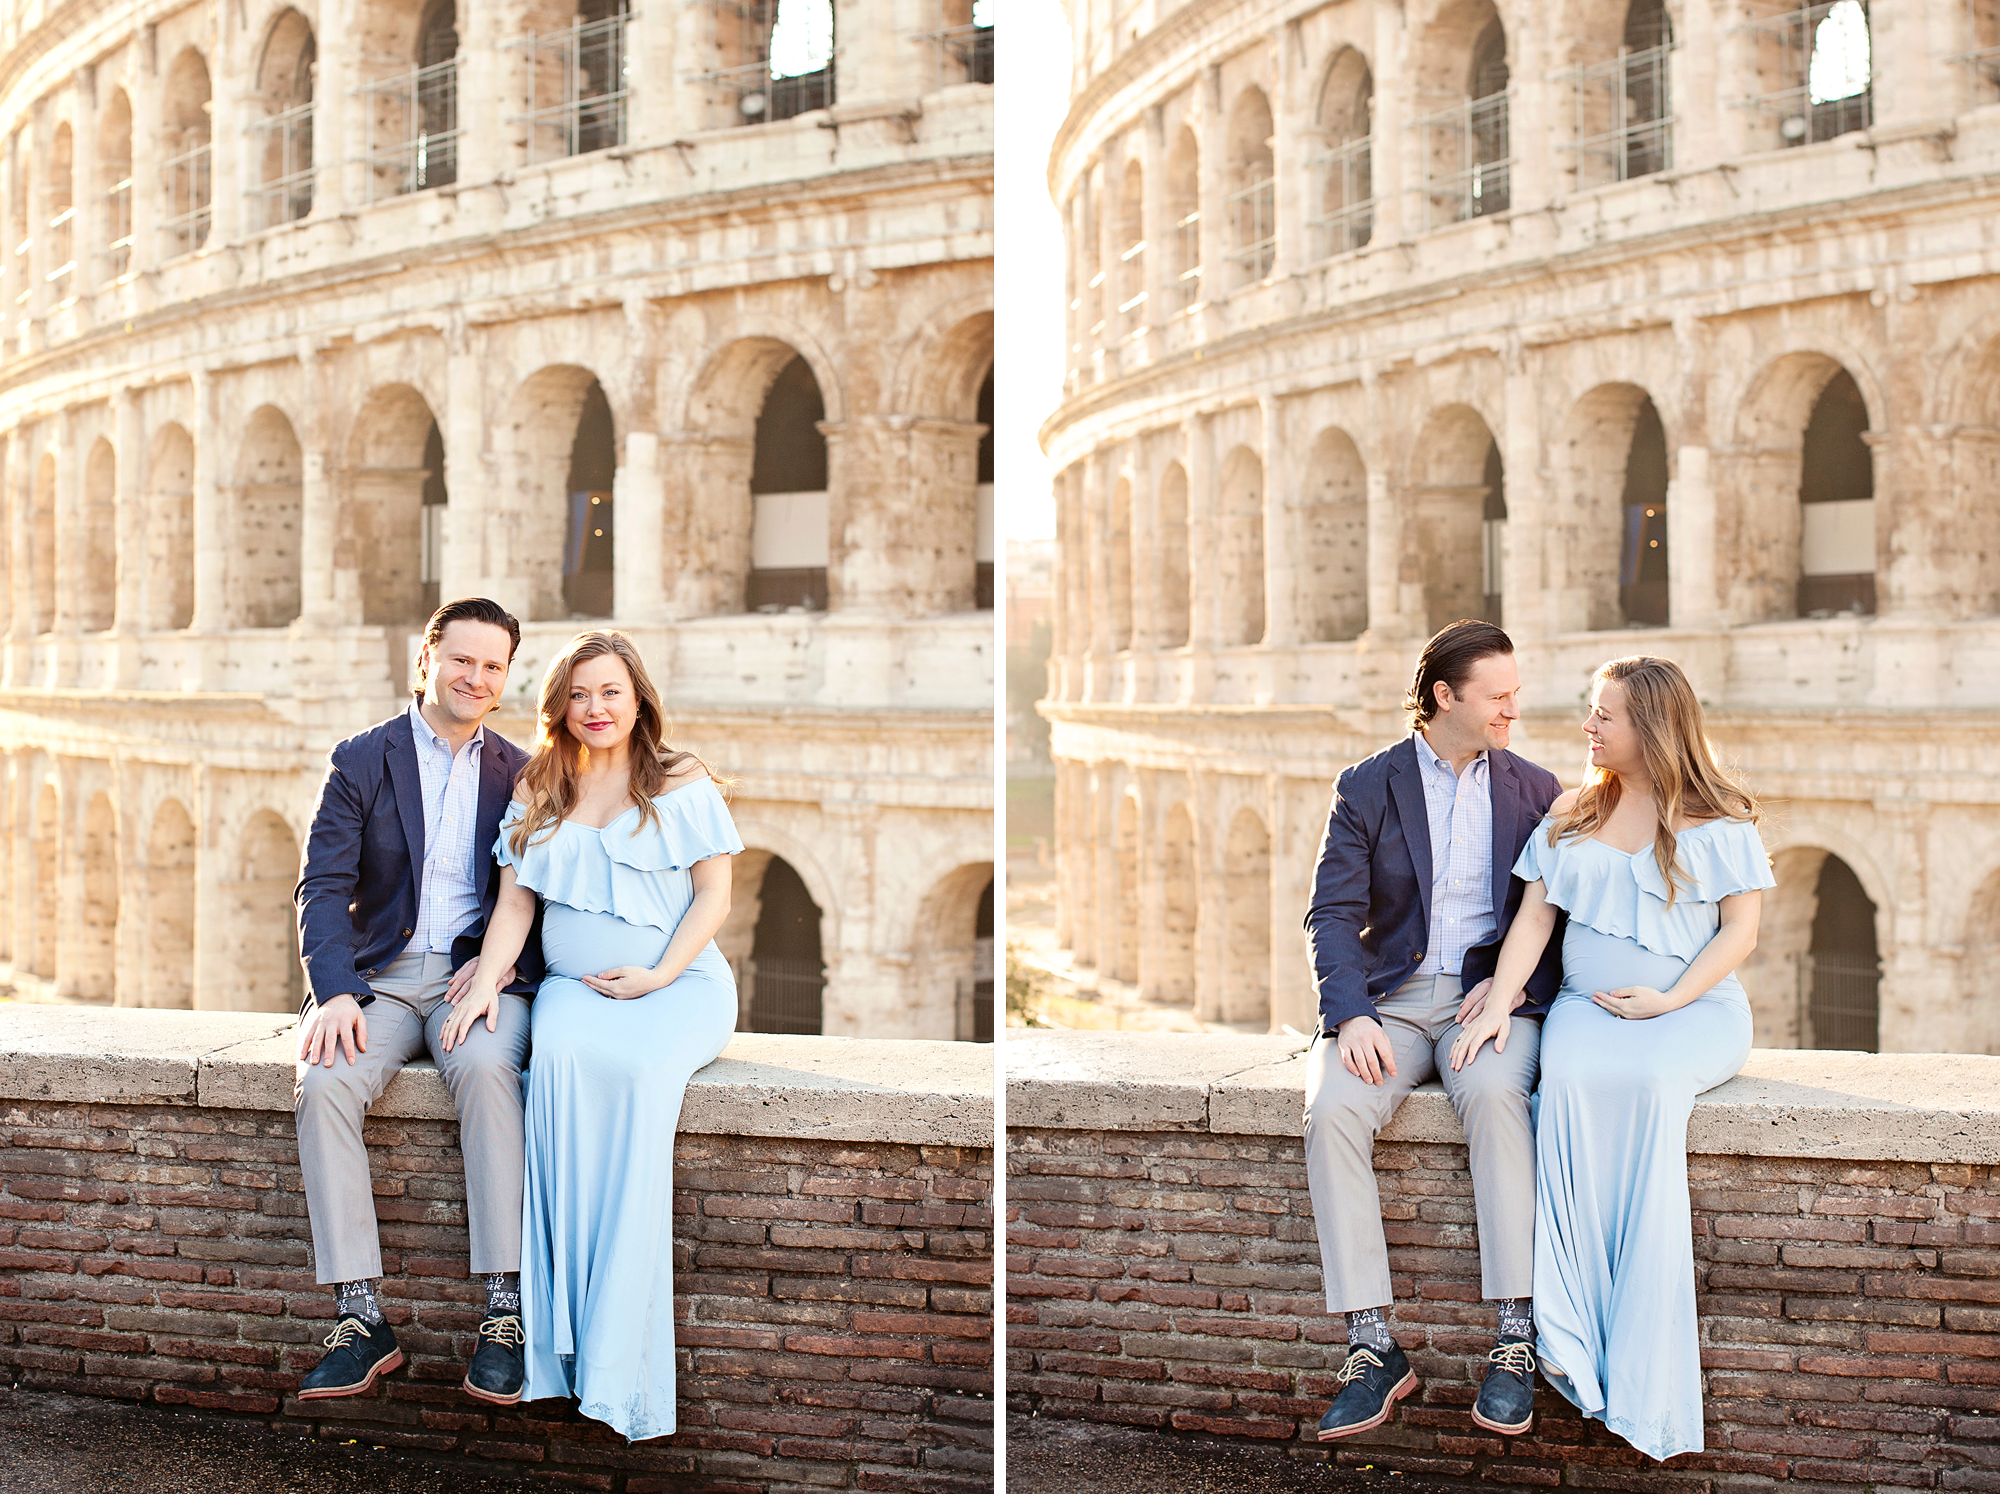 Maternity photoshoot in Rome, Italy by photographer Tricia Anne Photography | Rome Photographer, photoshoot rome, Rome babymoon photoshoot, maternity photo shoot, Colosseum Photoshoot